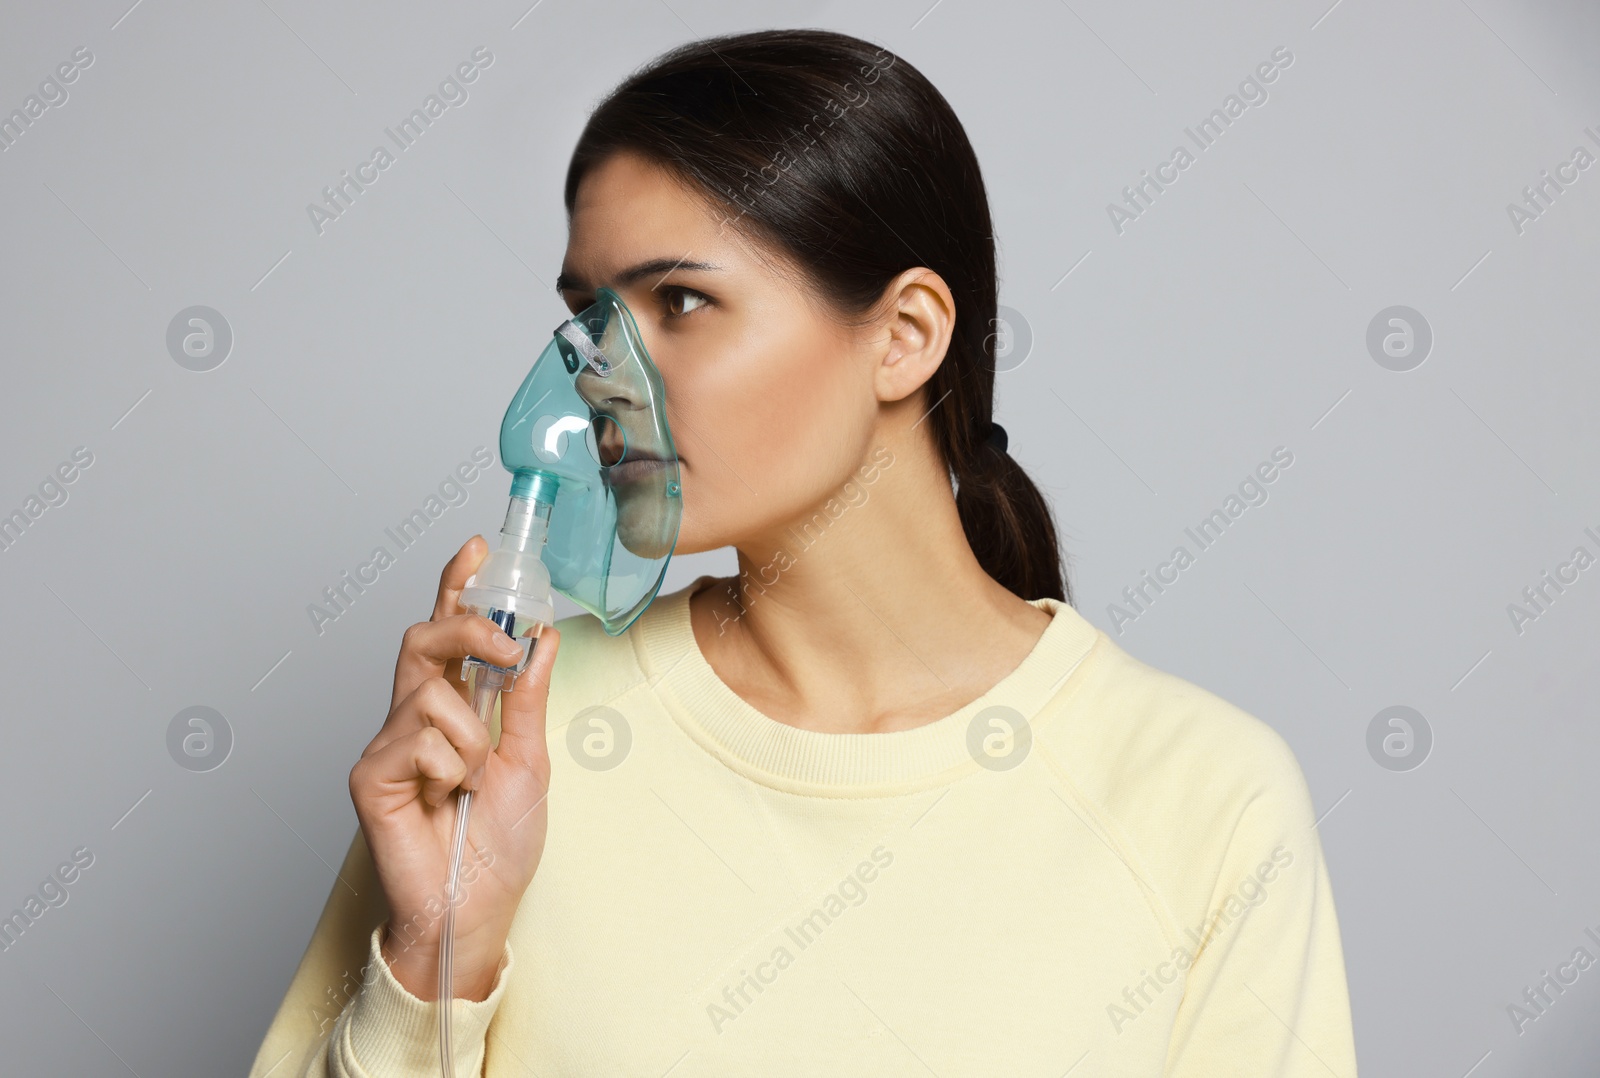 Photo of Sick young woman using nebulizer on grey background